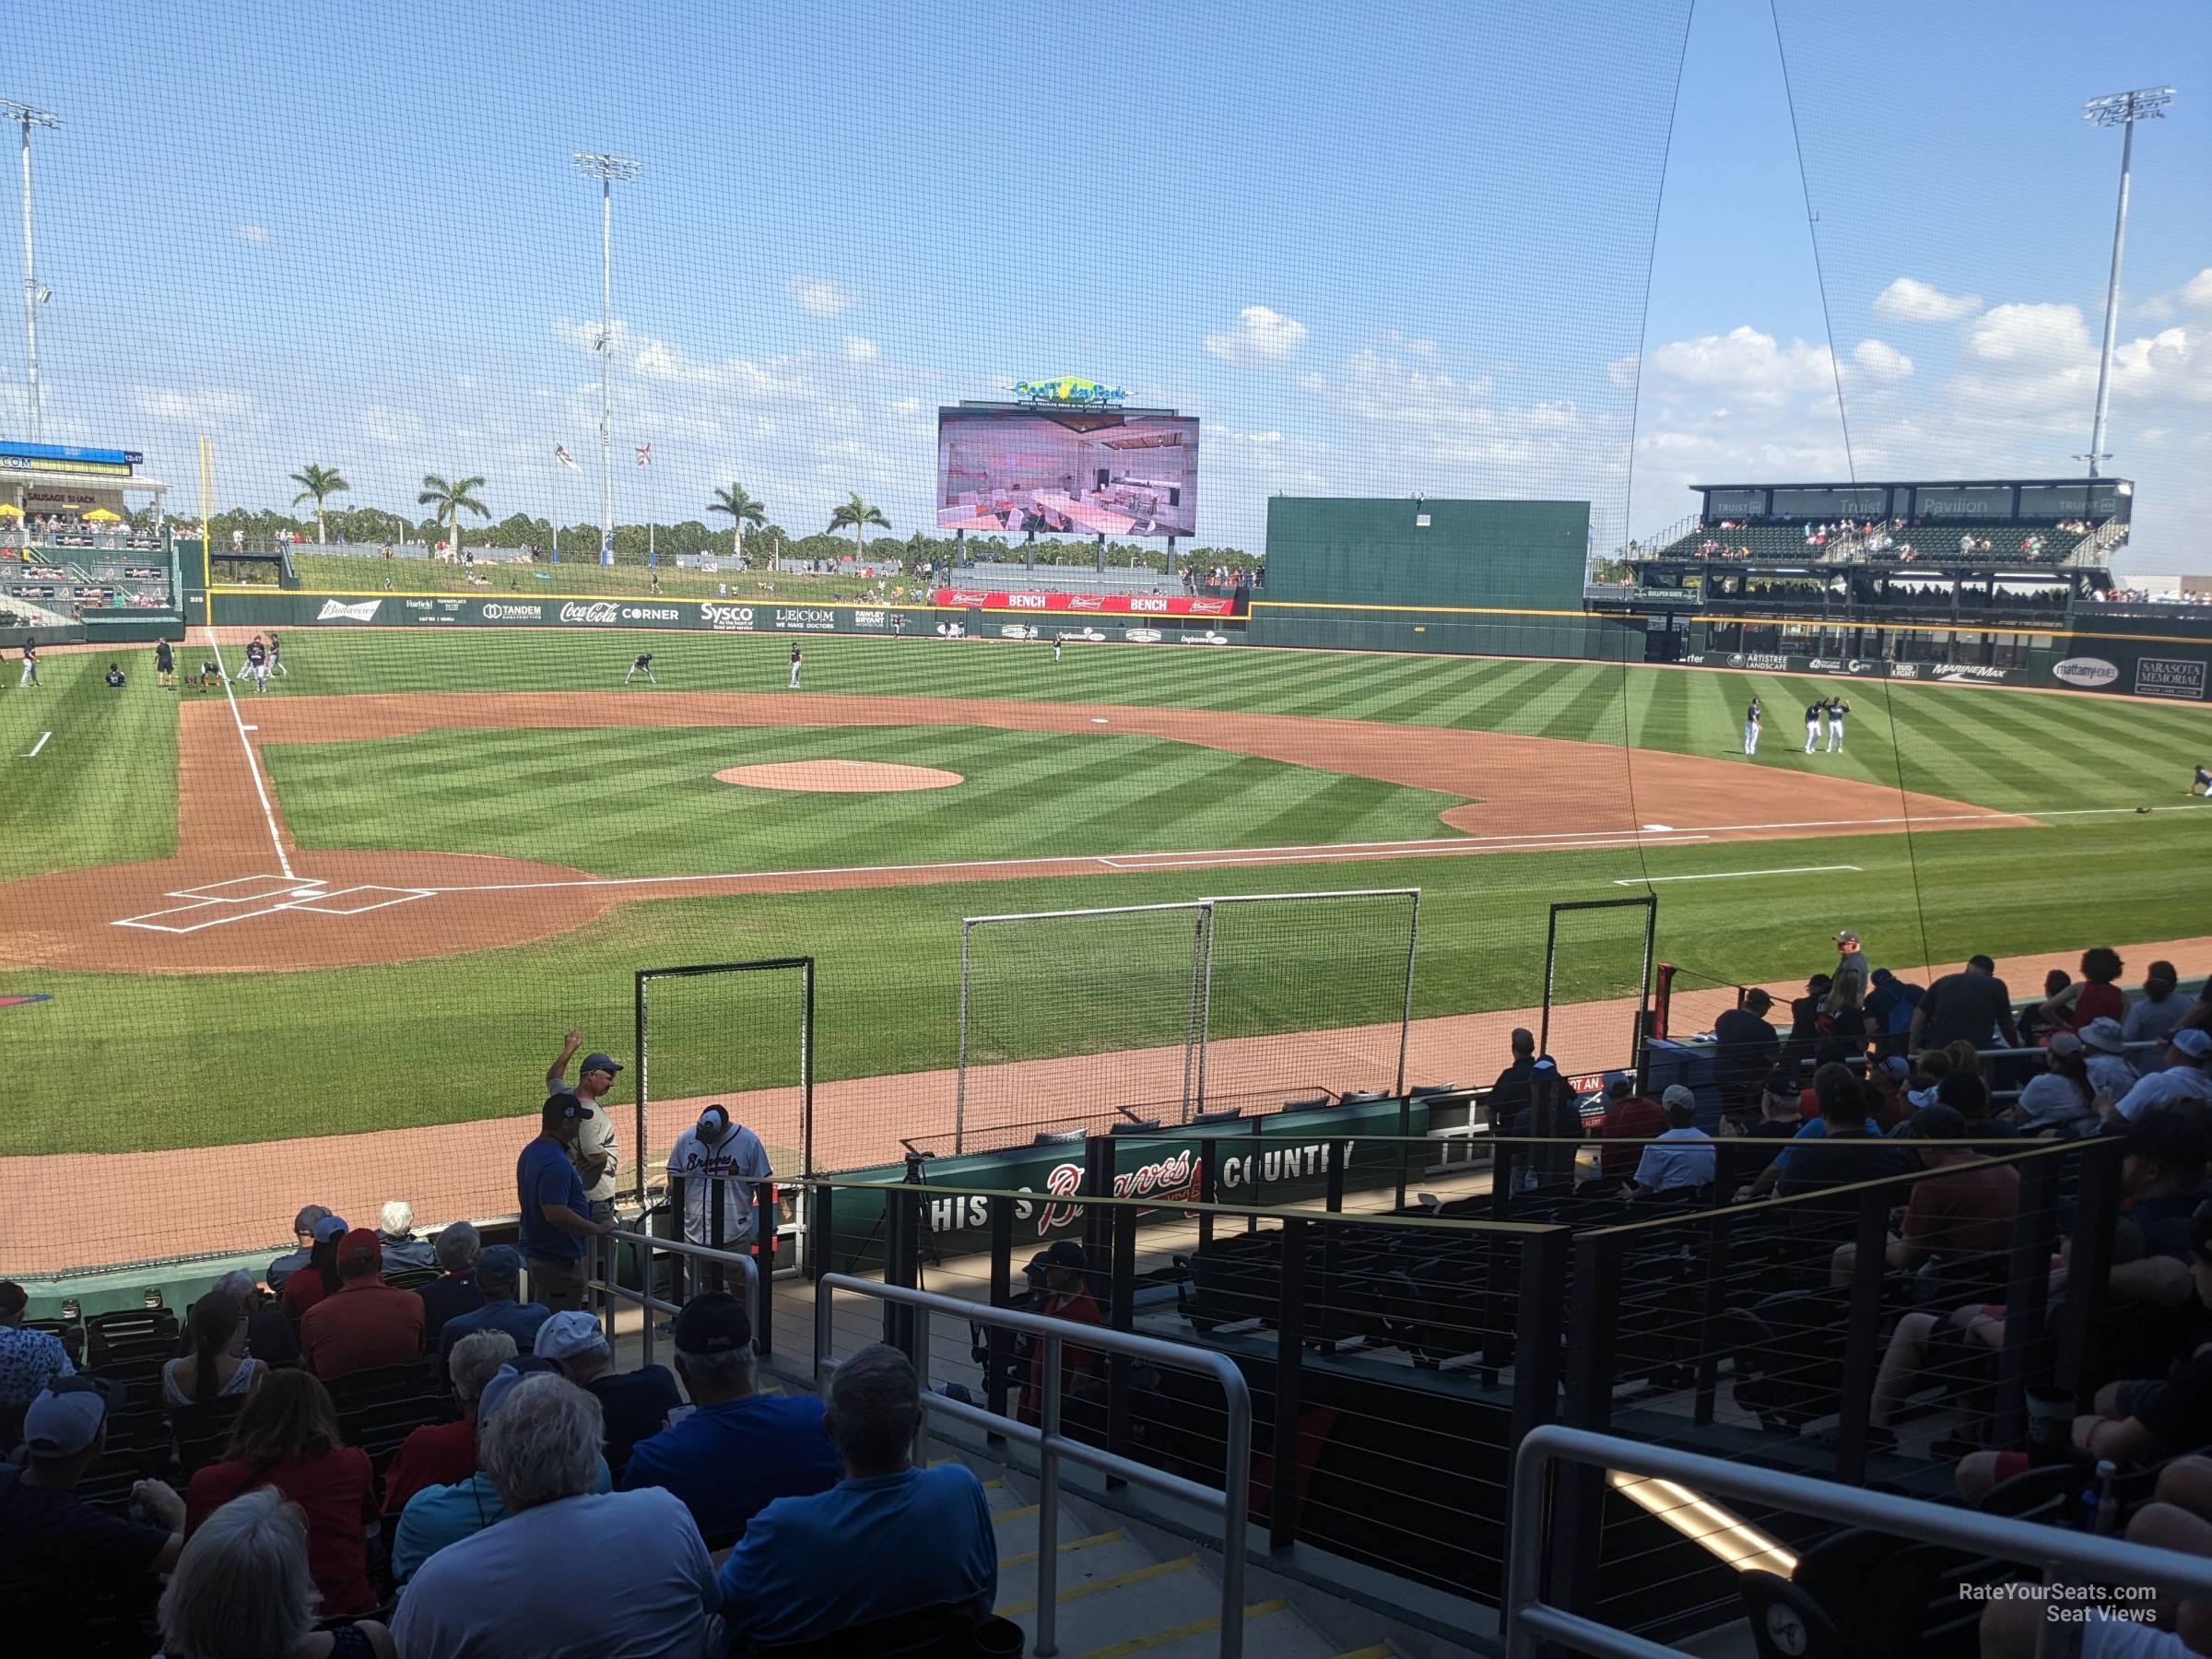 section 111, row 13 seat view  - cooltoday park